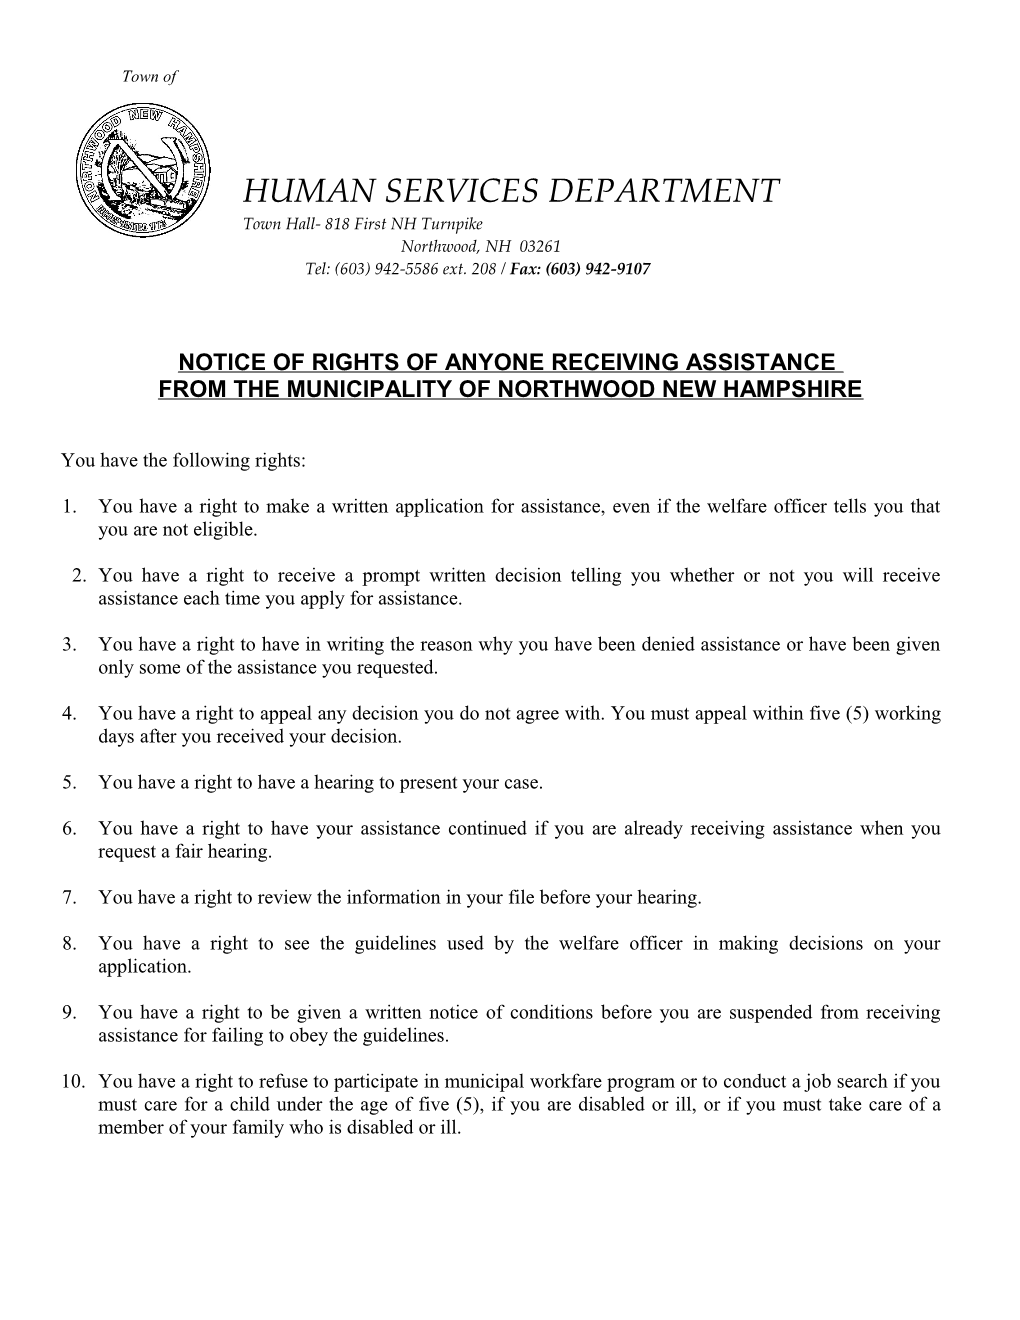 Notice of Rights of Anyone Receiving Assistance